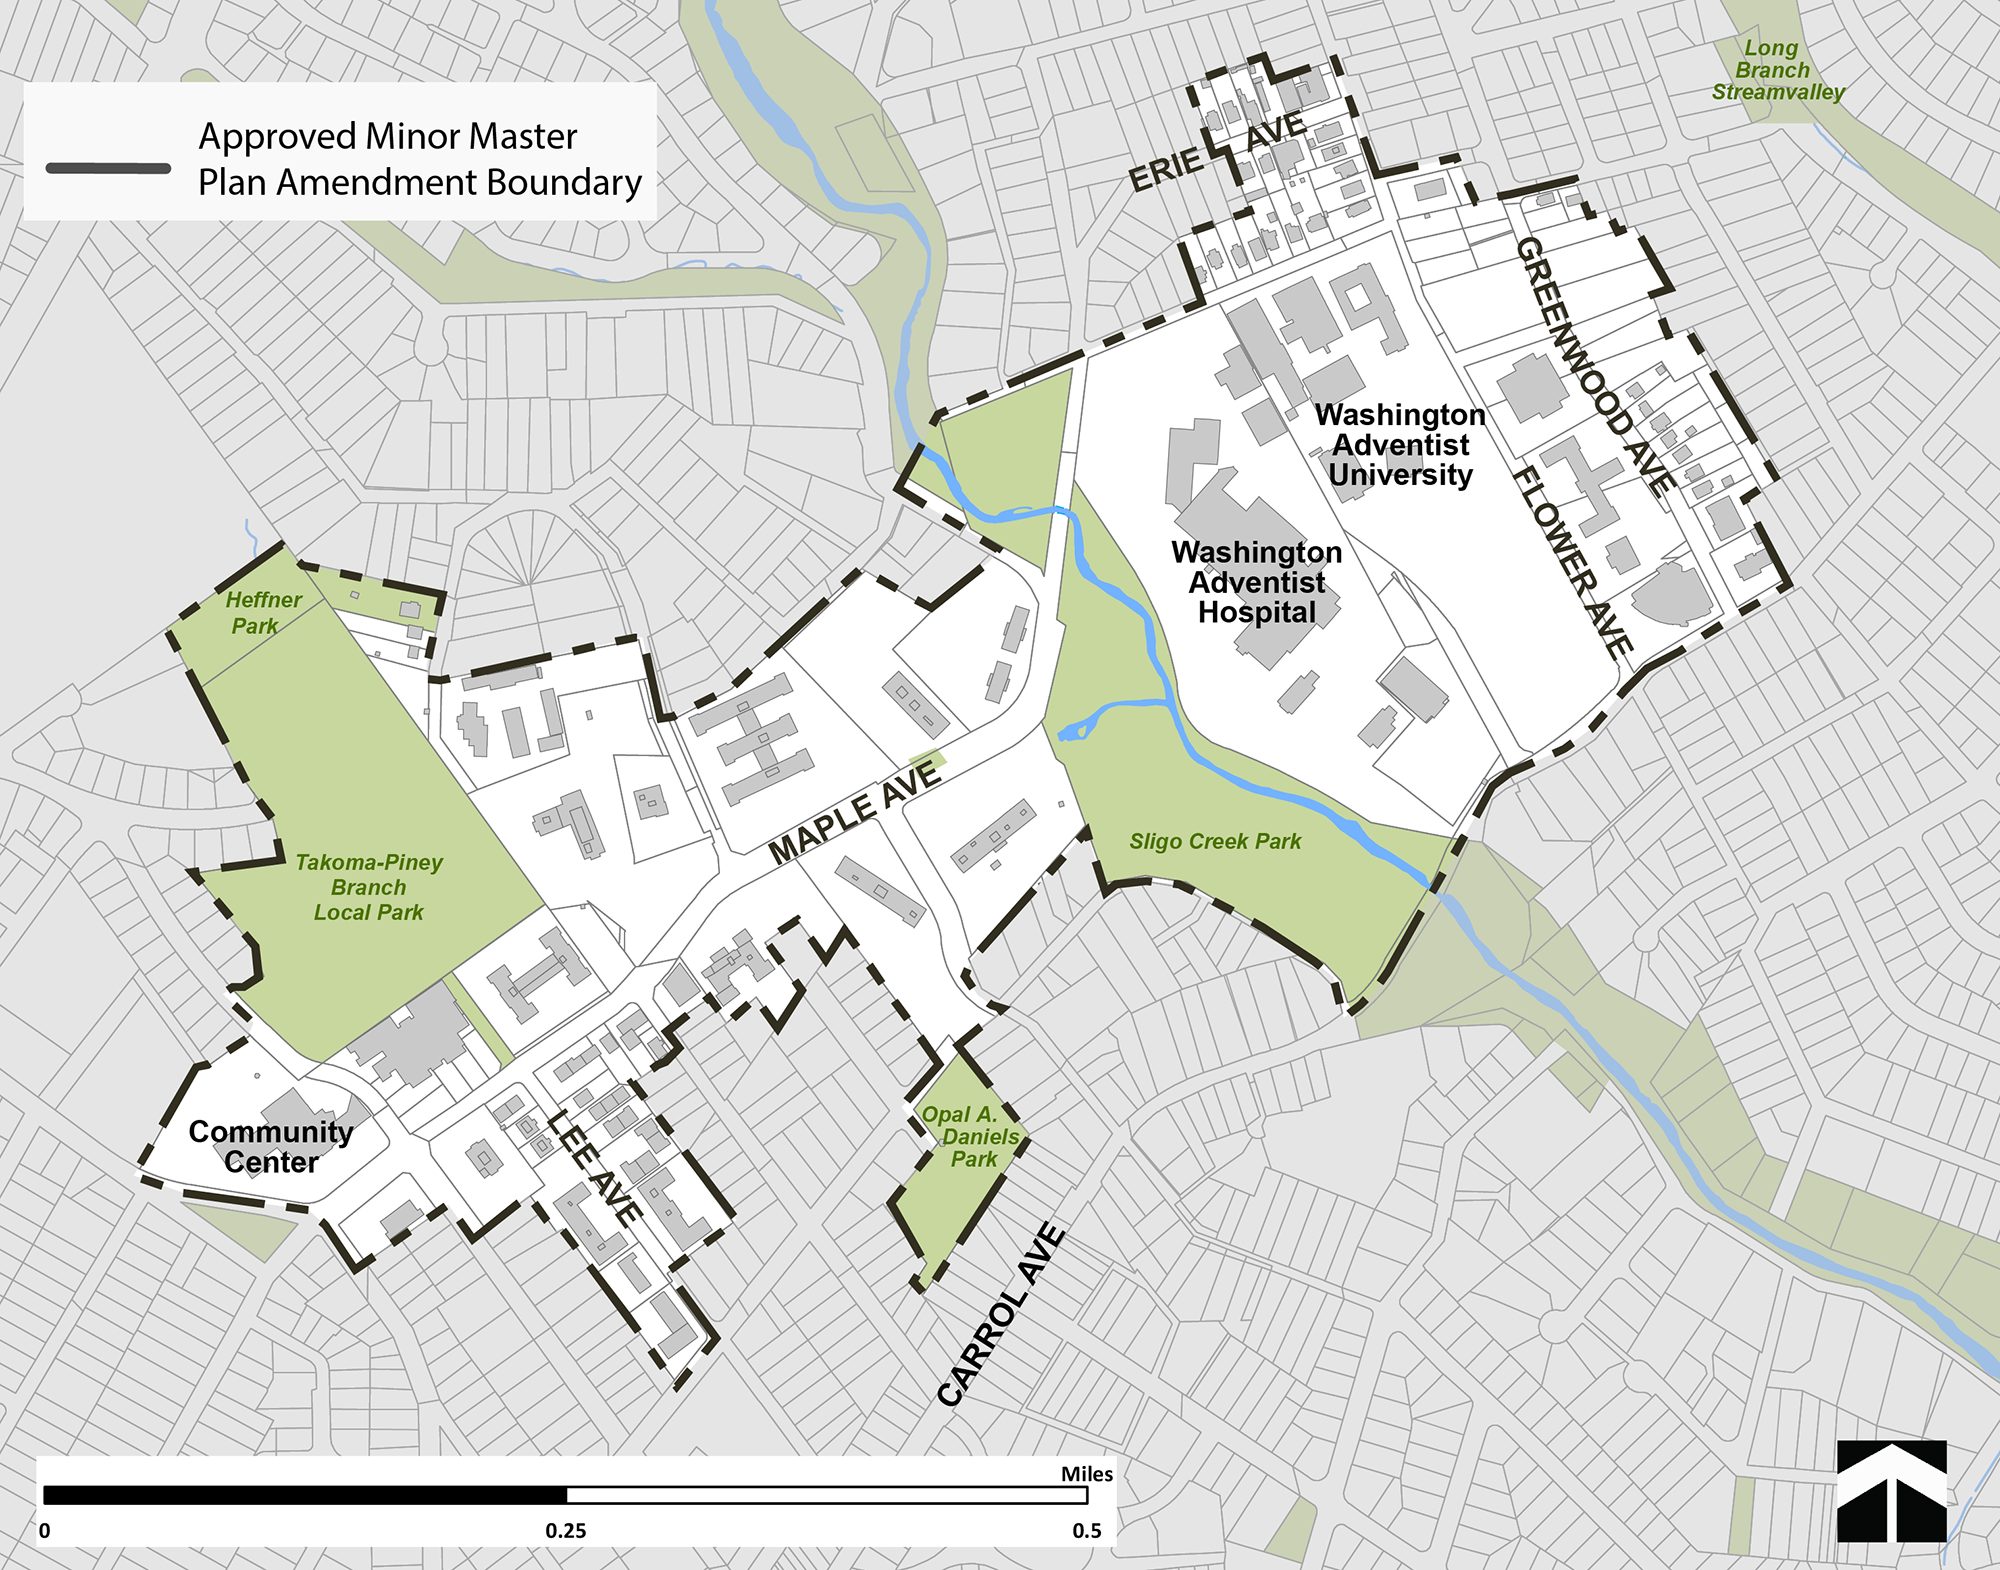 The map shows the Takoma Park Minor Master Plan Amendment Boundary area. This will encompass an area running along Maple Avenue between Washington Adventist University campus on the east and the Philadelphia Avenue on the west. Specifically, it will include the campus of the Washington Adventist University, the site of the now vacant Washington Adventist hospital, adjacent to the University, and mixed-use properties at the intersection of Flower Avenue and Erie Avenue. It will include the multifamily properties along Maple Avenue as well as the Takoma Park Community Center, Piney Branch Elementary School, Piney Branch Park, Heffner Park and Opal Daniels Park. The Takoma Park Public works buildings located off of Ritchie Avenue will also be included in the plan boundary.